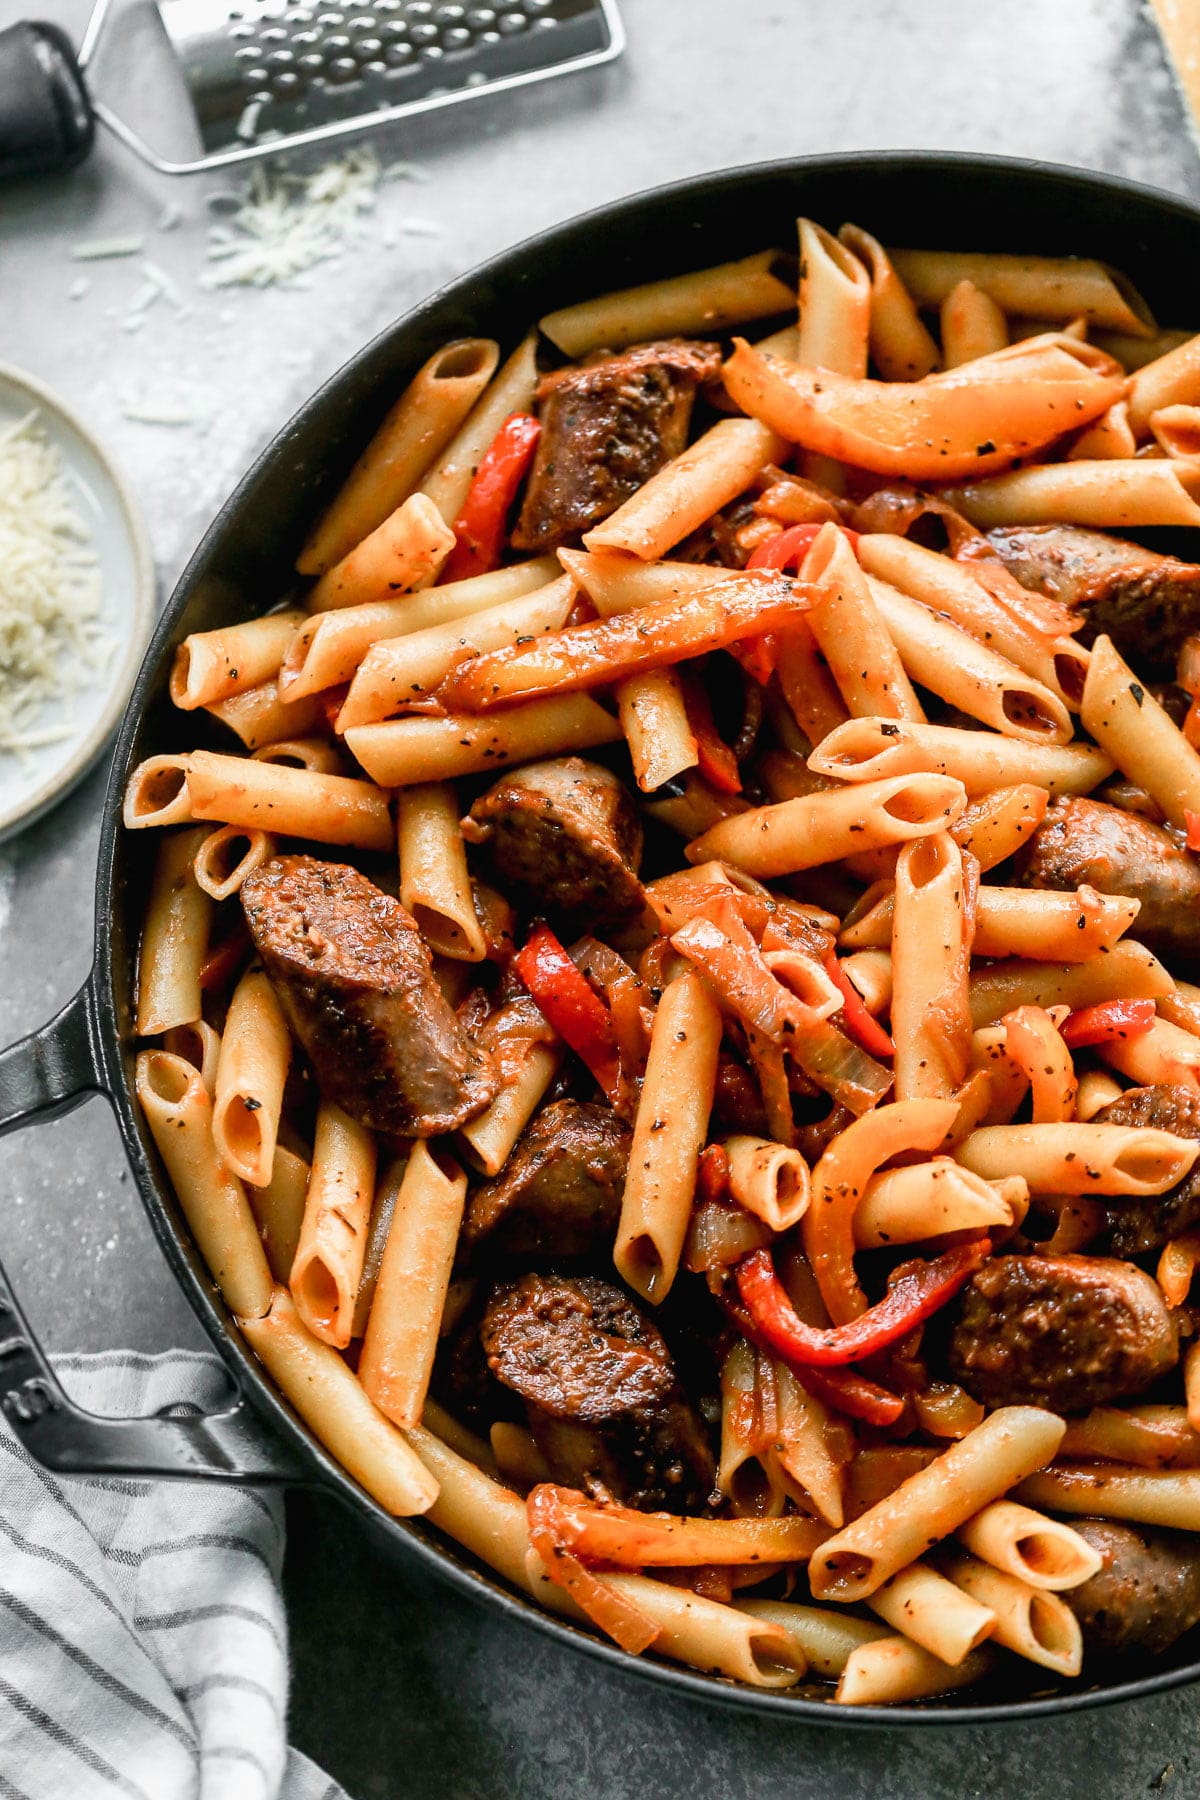 Rather simple and admittedly un-fancy, our Italian Sausage and Peppers Pasta doesn't have to be the most sophisticated gal on the block because what it IS, is delicious, quick-cooking and made with easy-to-find inexpensive &nbsp;ingredients.